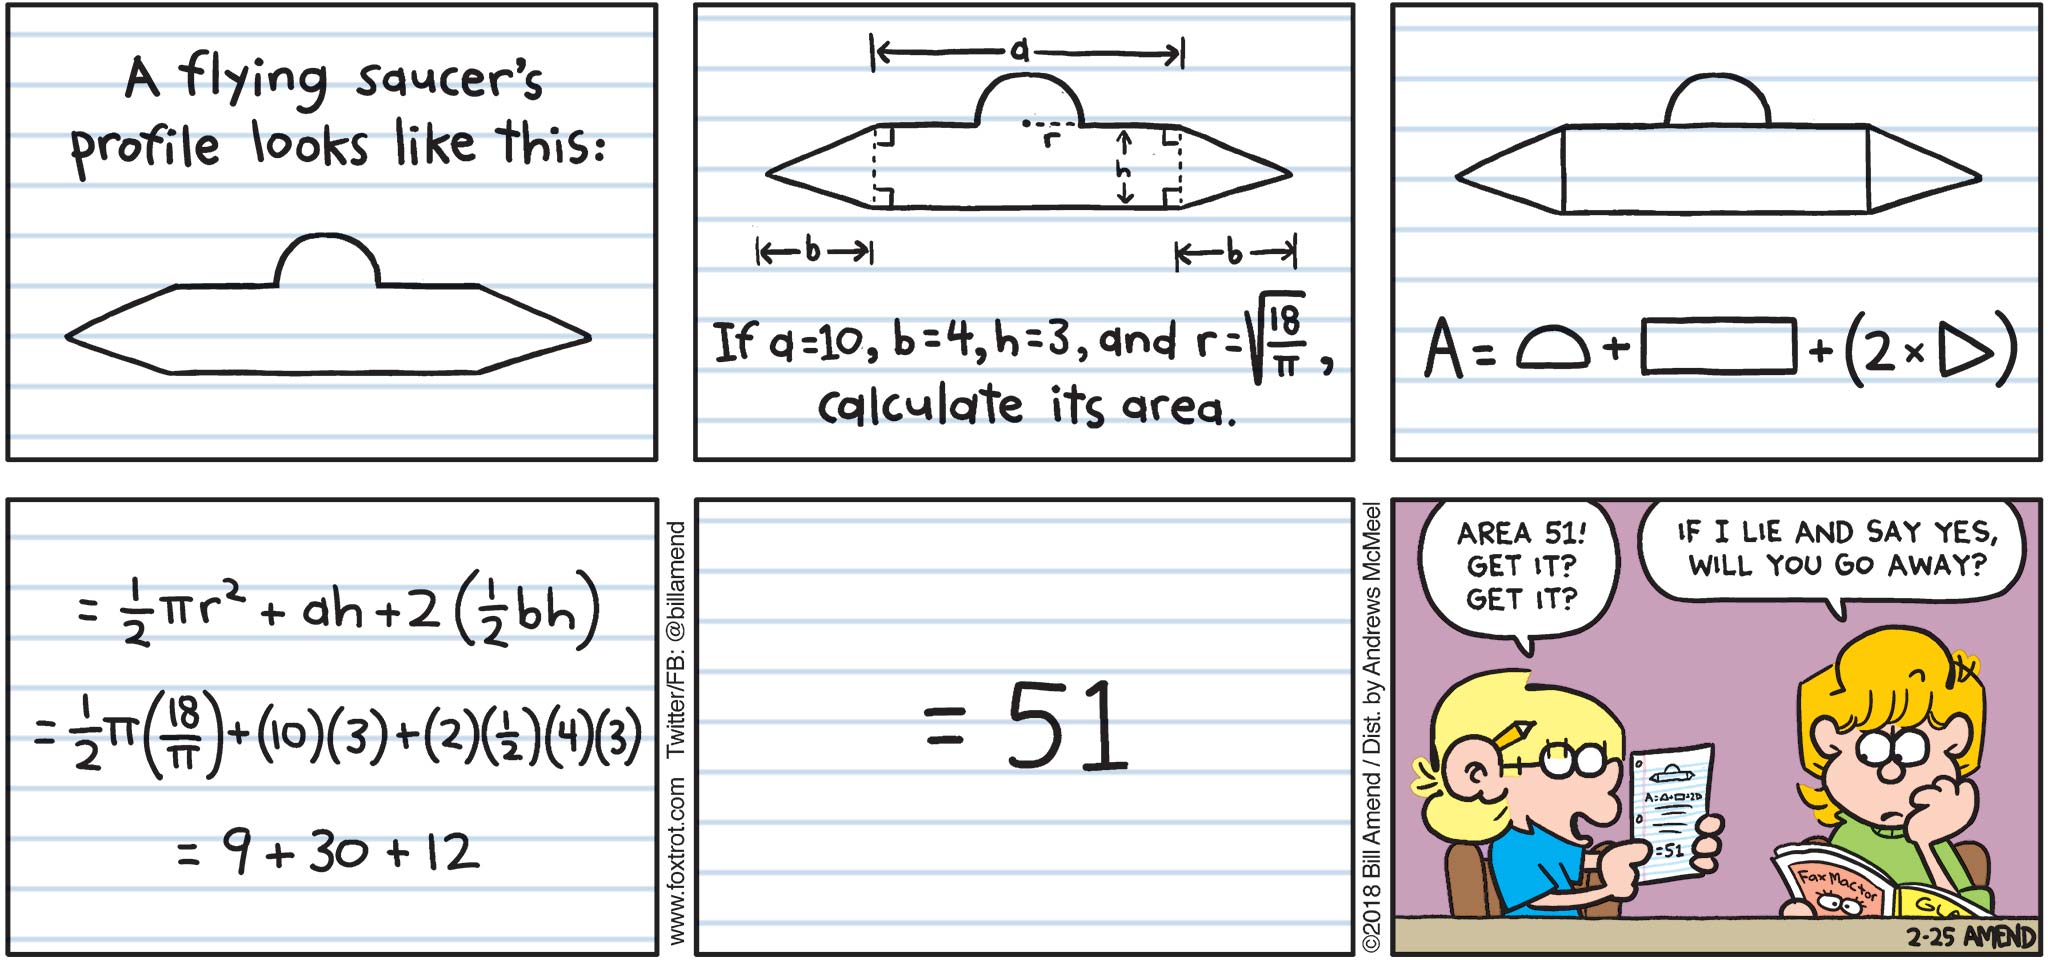 FoxTrot by Bill Amend - "UFO Math" published February 25, 2018 - Jason says: Area 51! Get it? Get it? Paige says: If I lie and say yes, will you go away. 